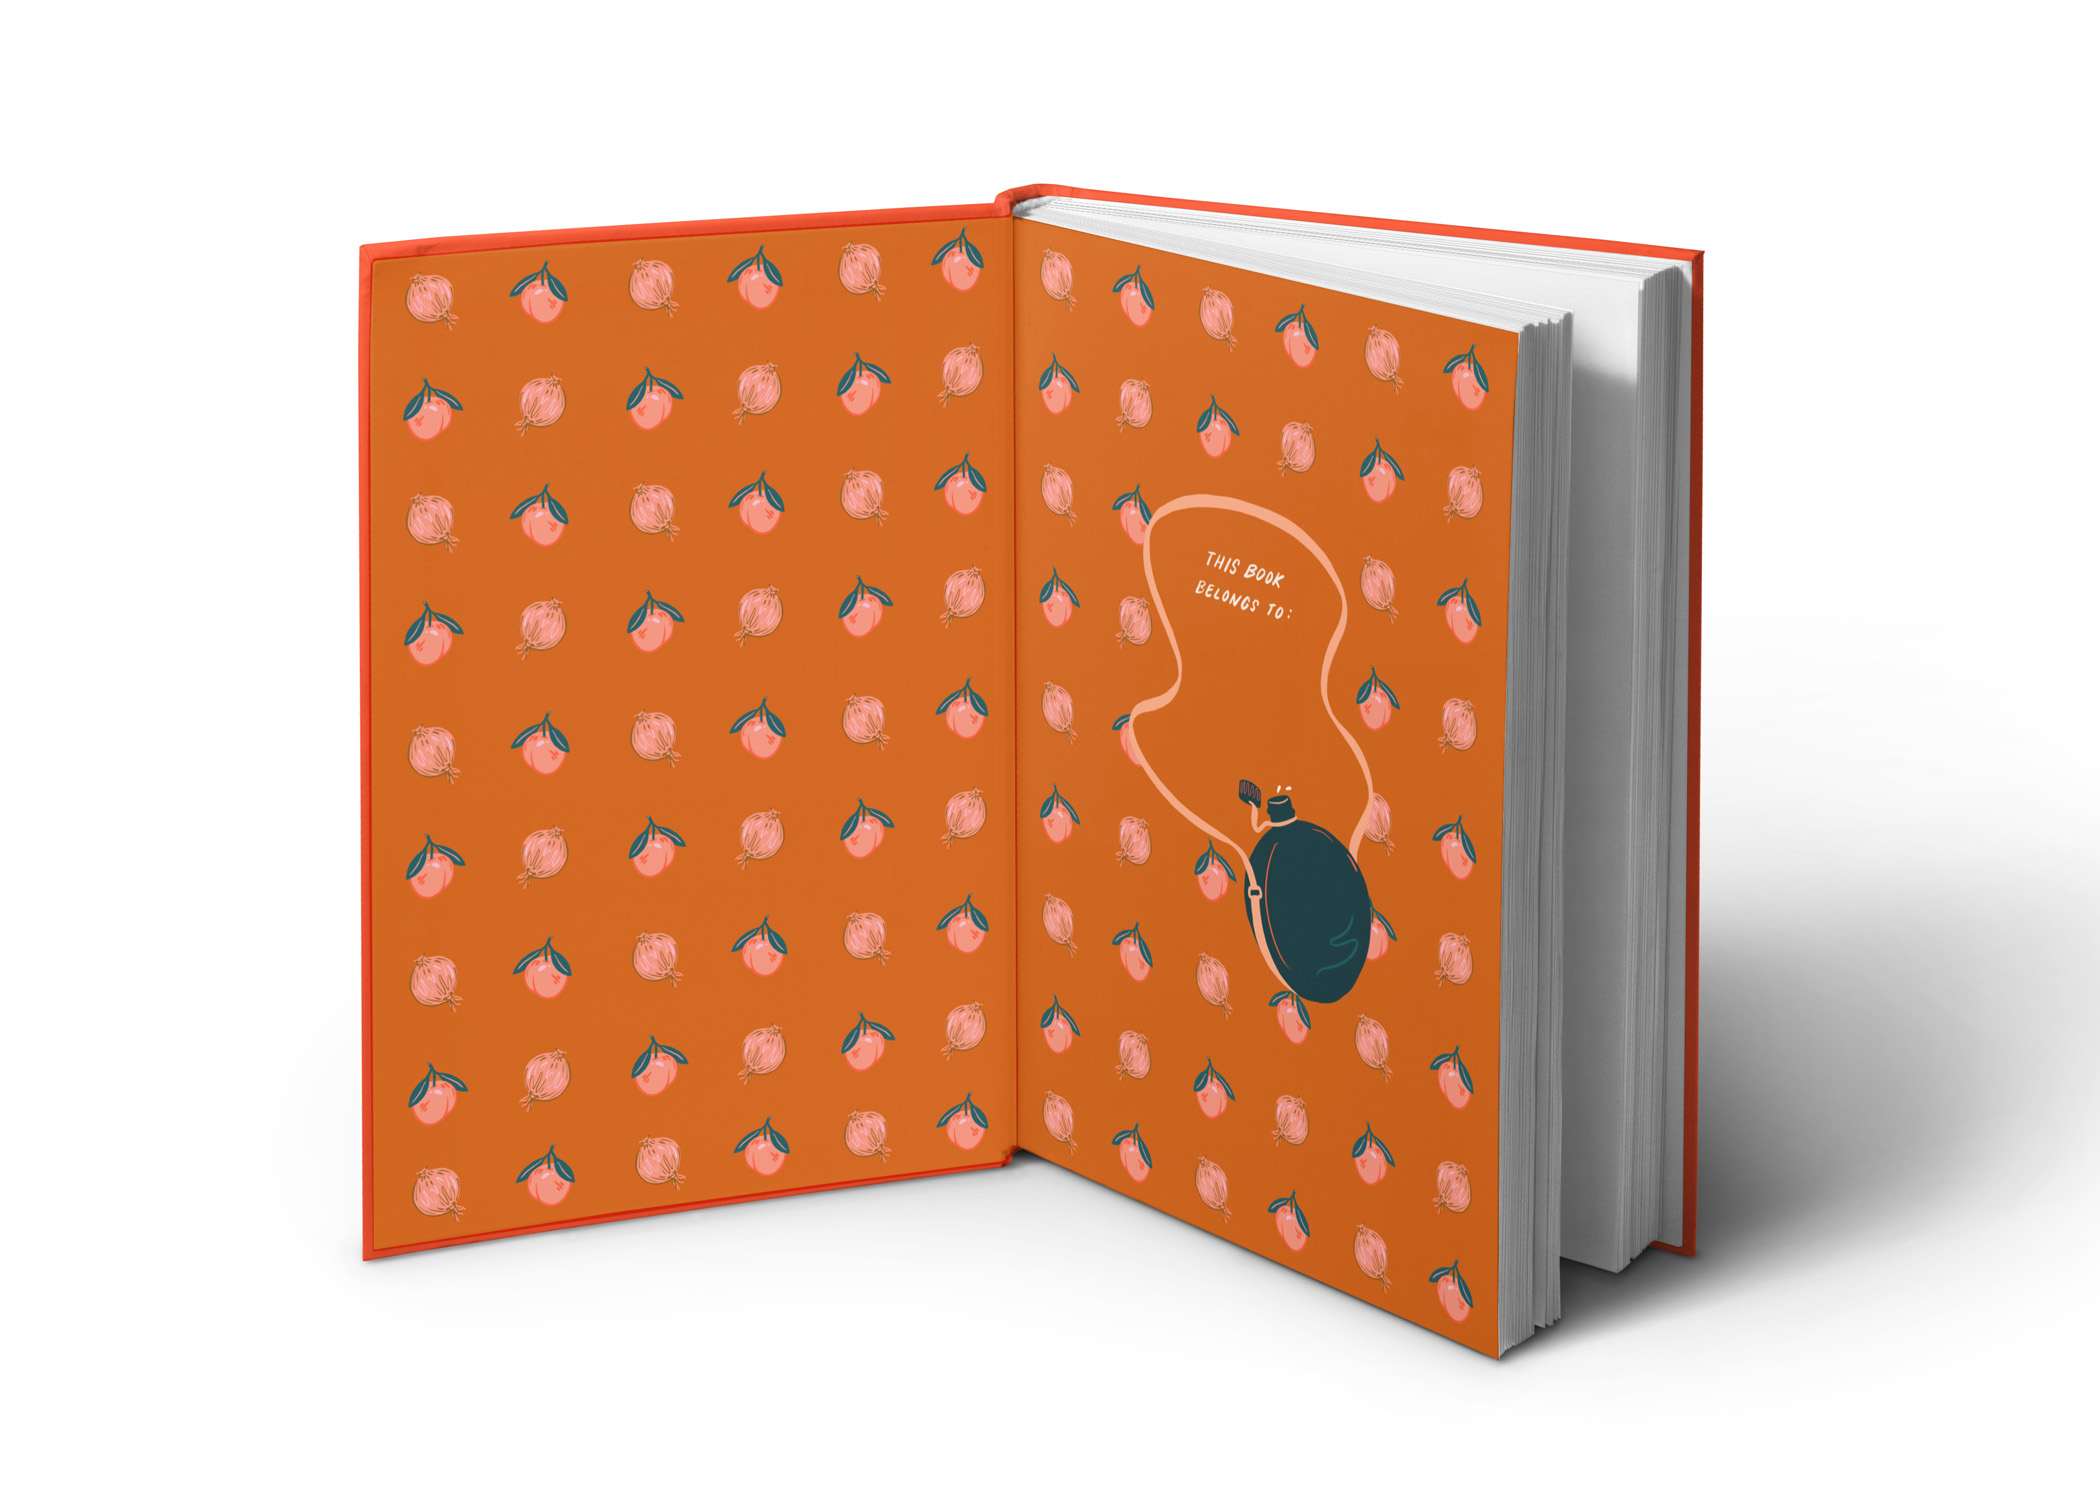 Holes Book Cover Illustrations on Behance